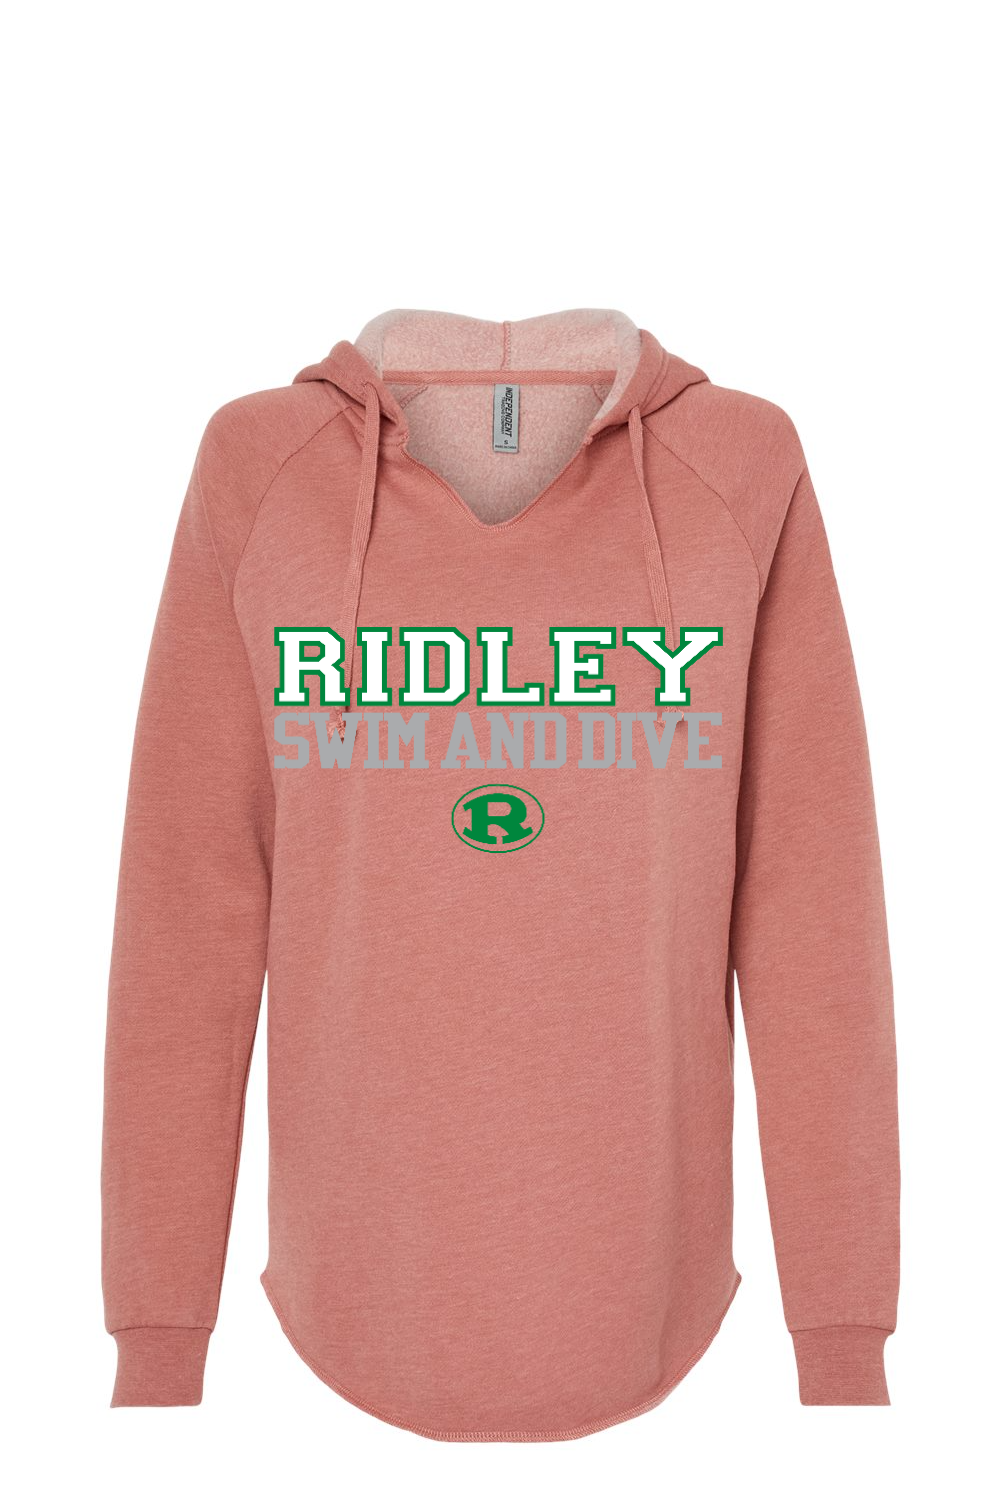 Ridley Swim and Dive Independent Trading Co. Women’s Lightweight California Wave Wash Hooded Sweatshirt